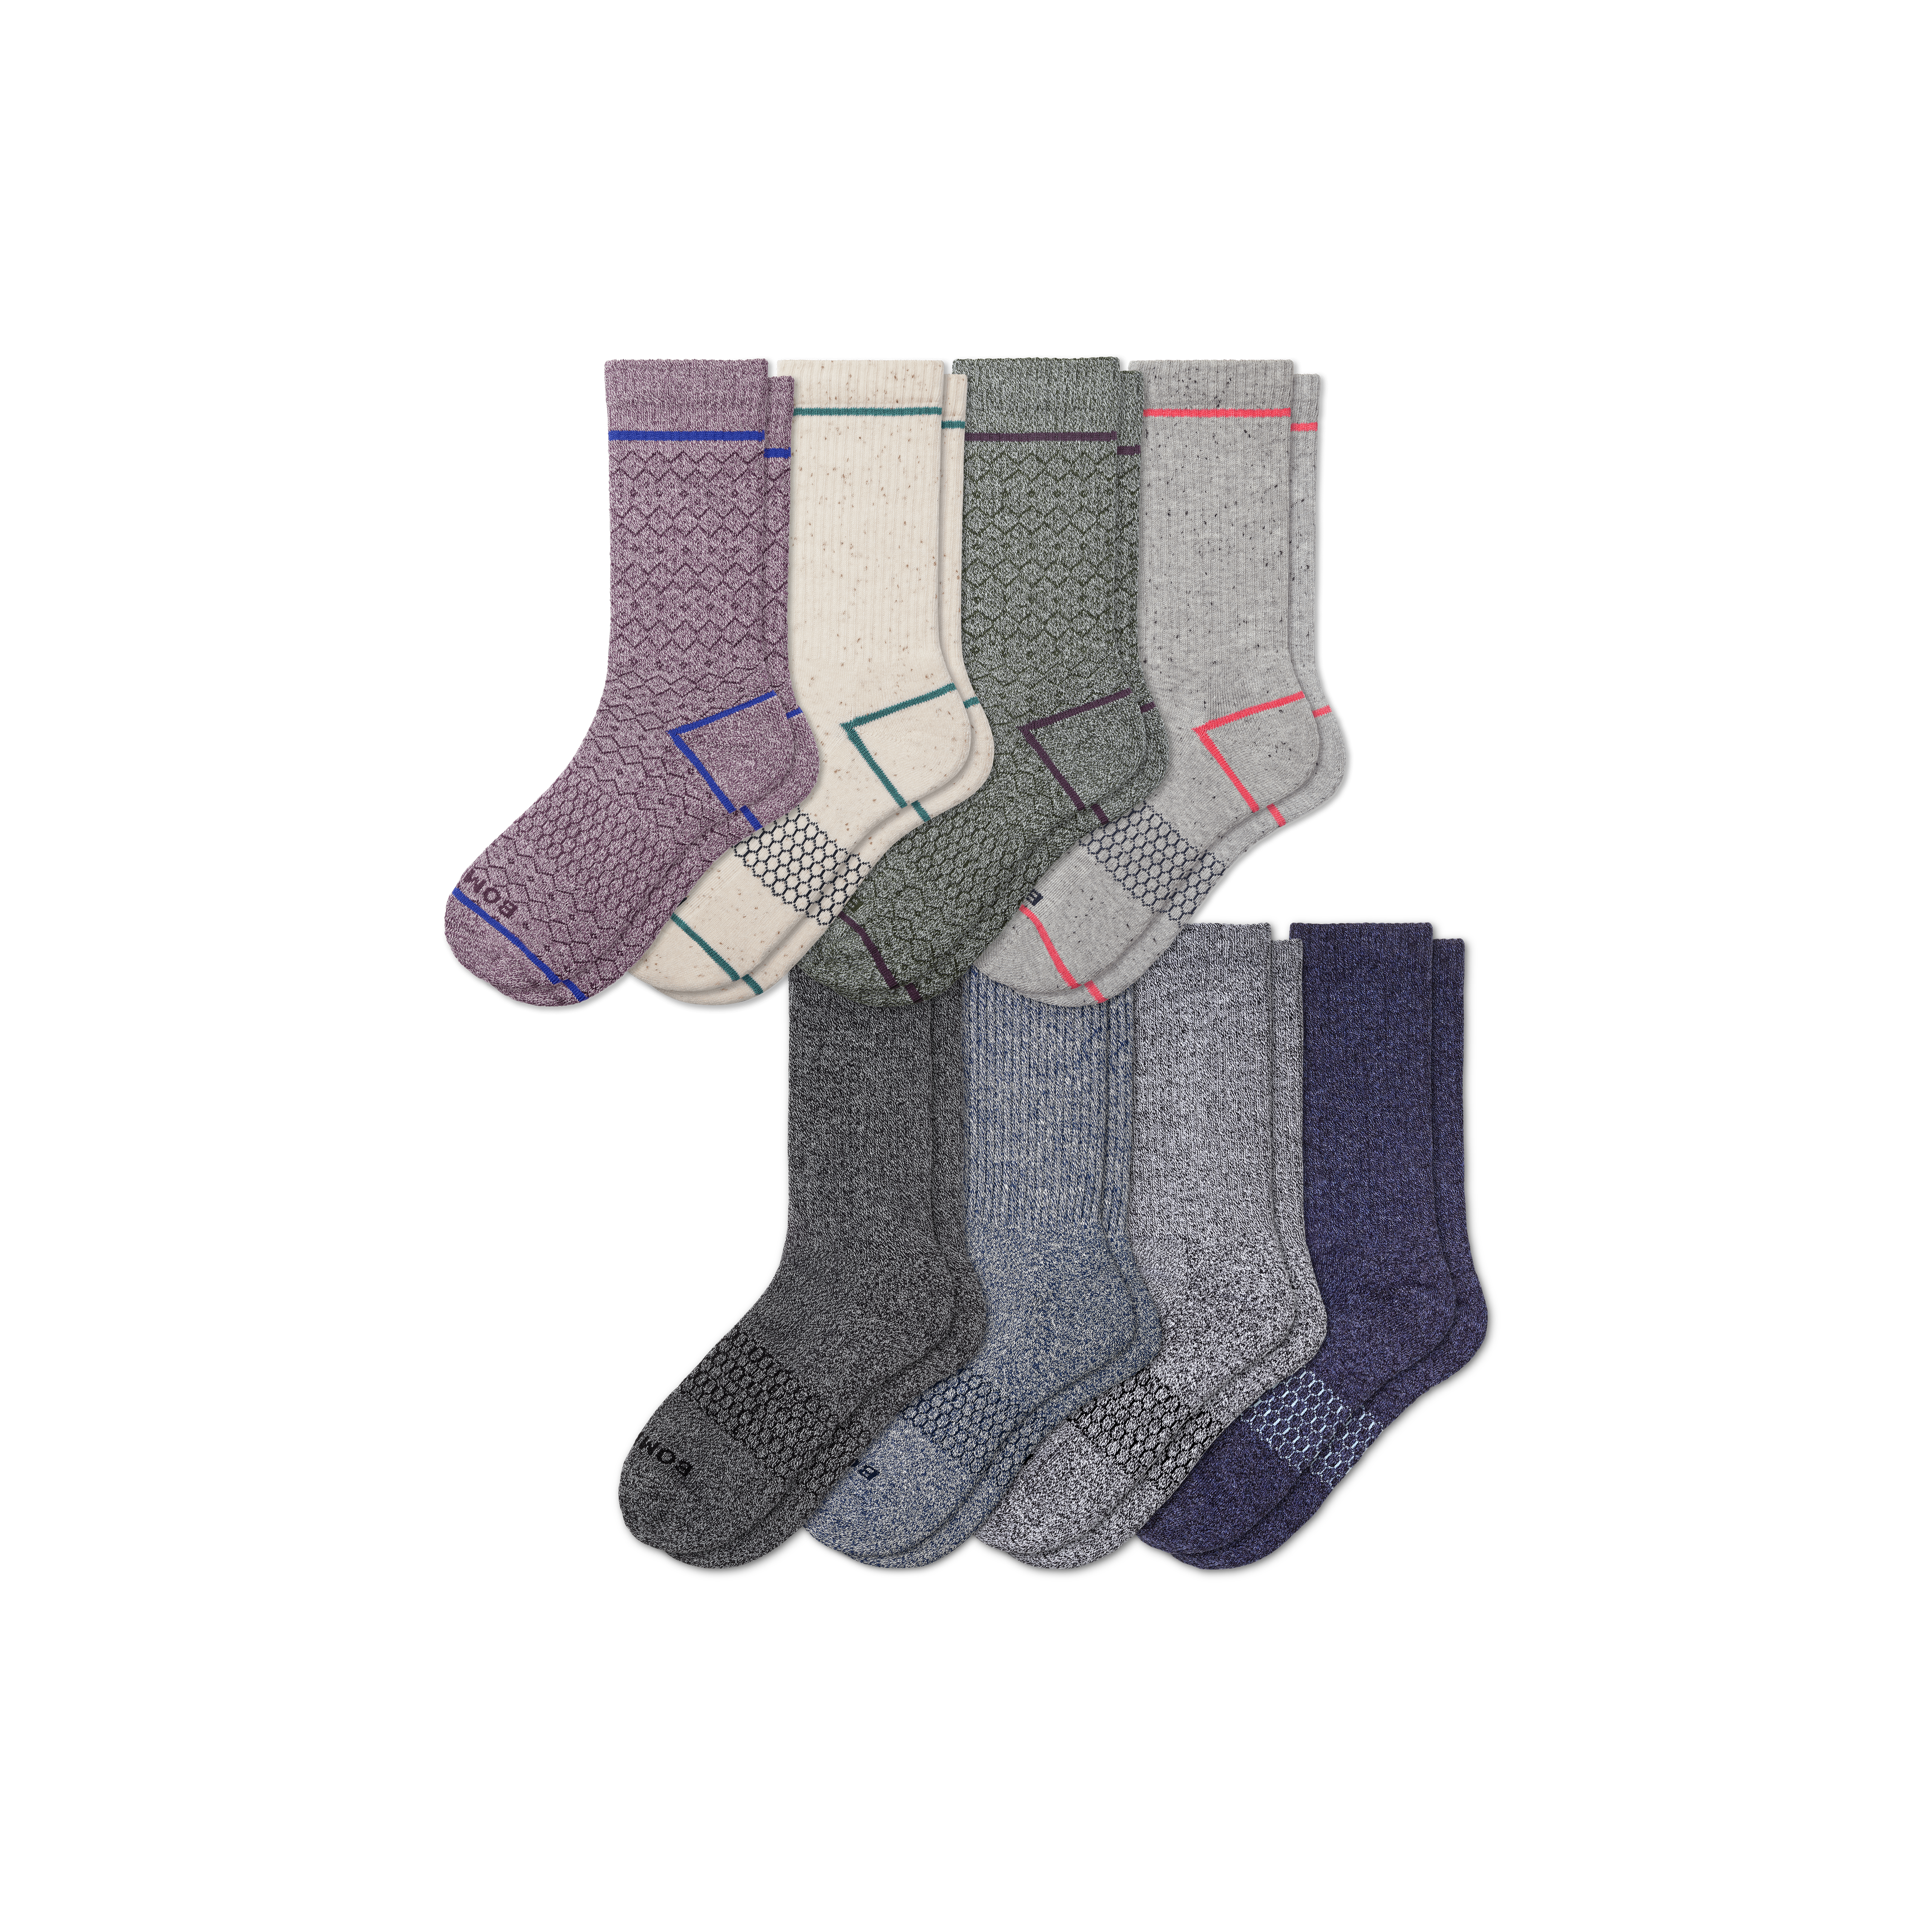 Bombas Calf Sock 8-pack In Plum Olive Marl Mix